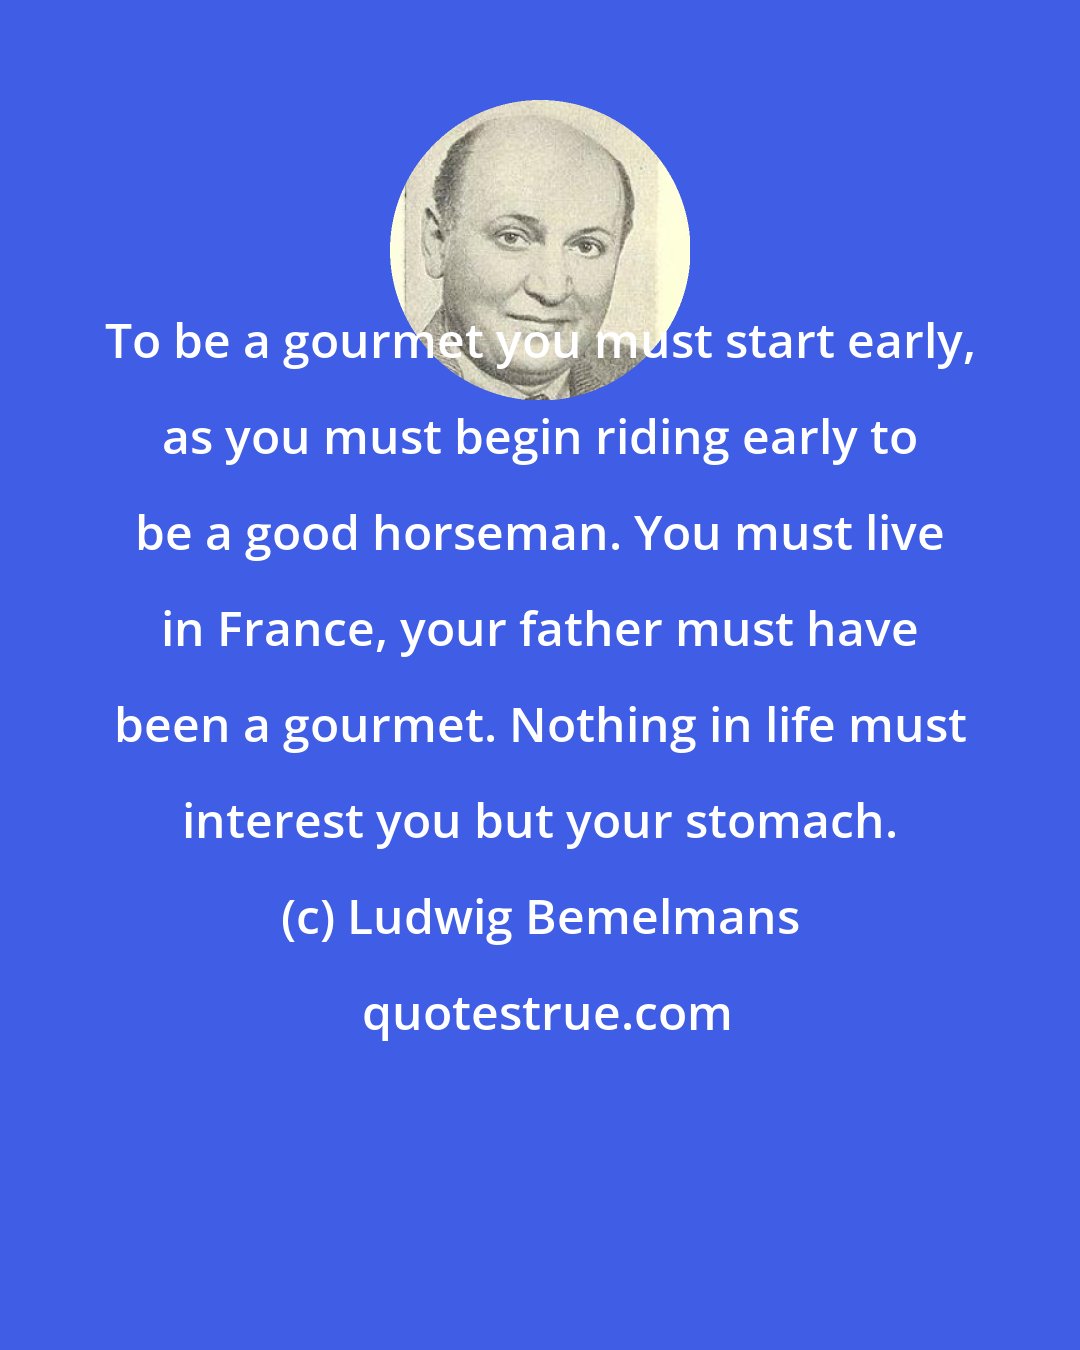 Ludwig Bemelmans: To be a gourmet you must start early, as you must begin riding early to be a good horseman. You must live in France, your father must have been a gourmet. Nothing in life must interest you but your stomach.